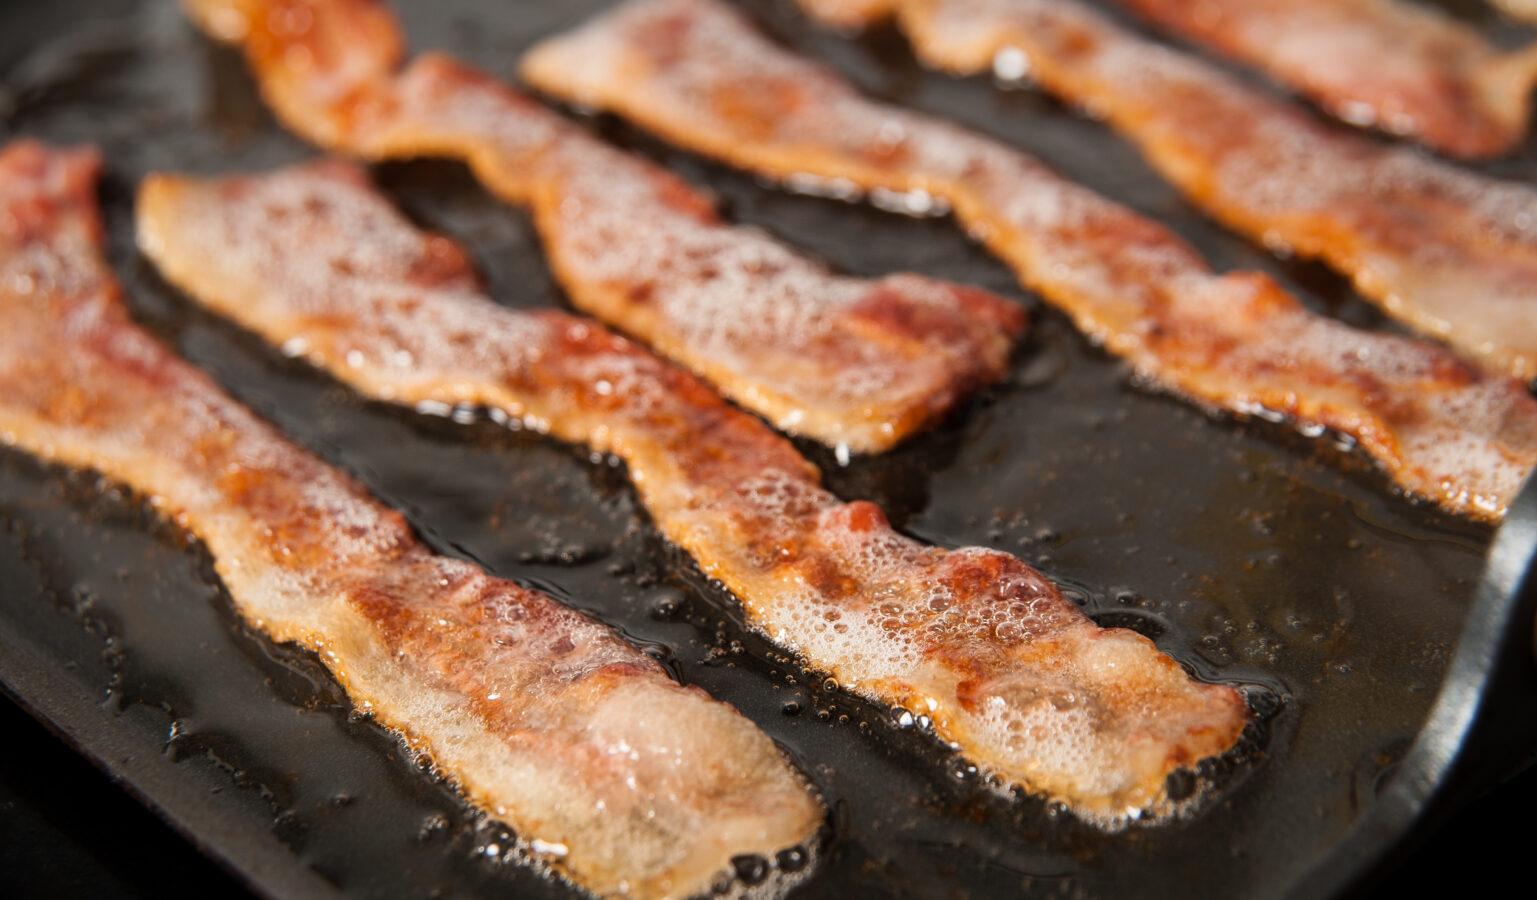 Bacon Production Implicated as Air Pollution Cause in China